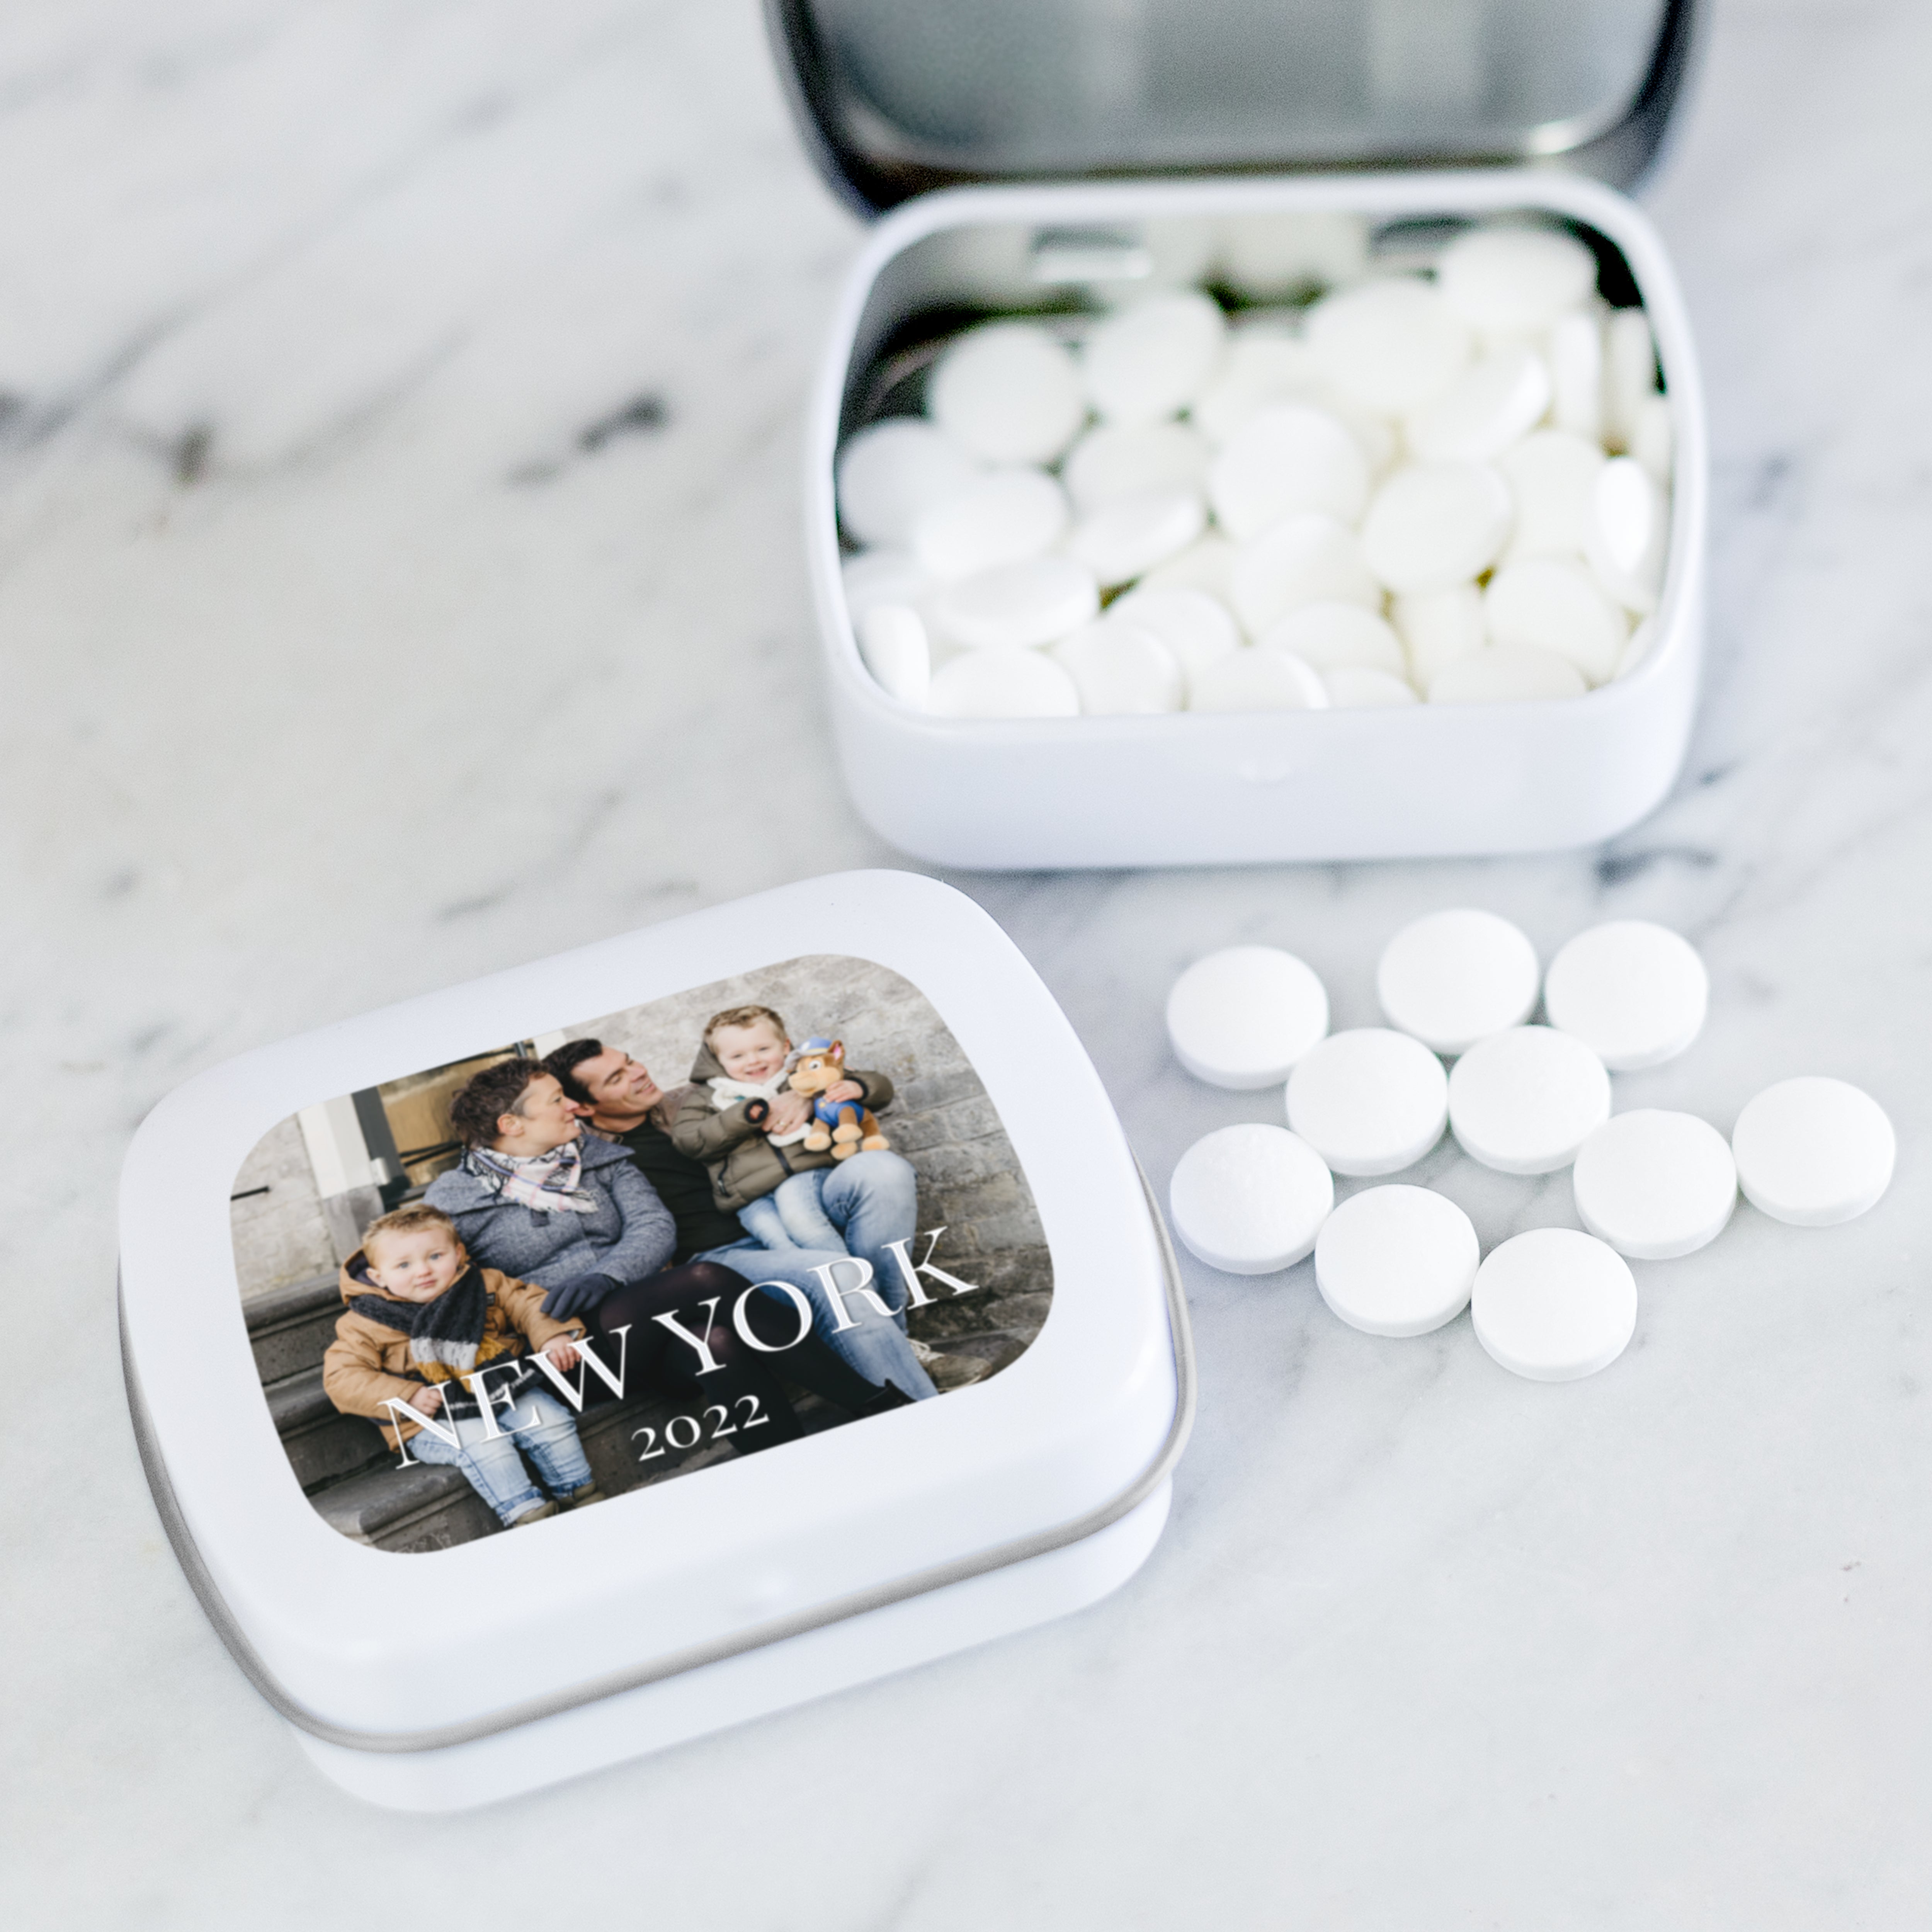 Personalised sweets tins - Peppermints - set of 10